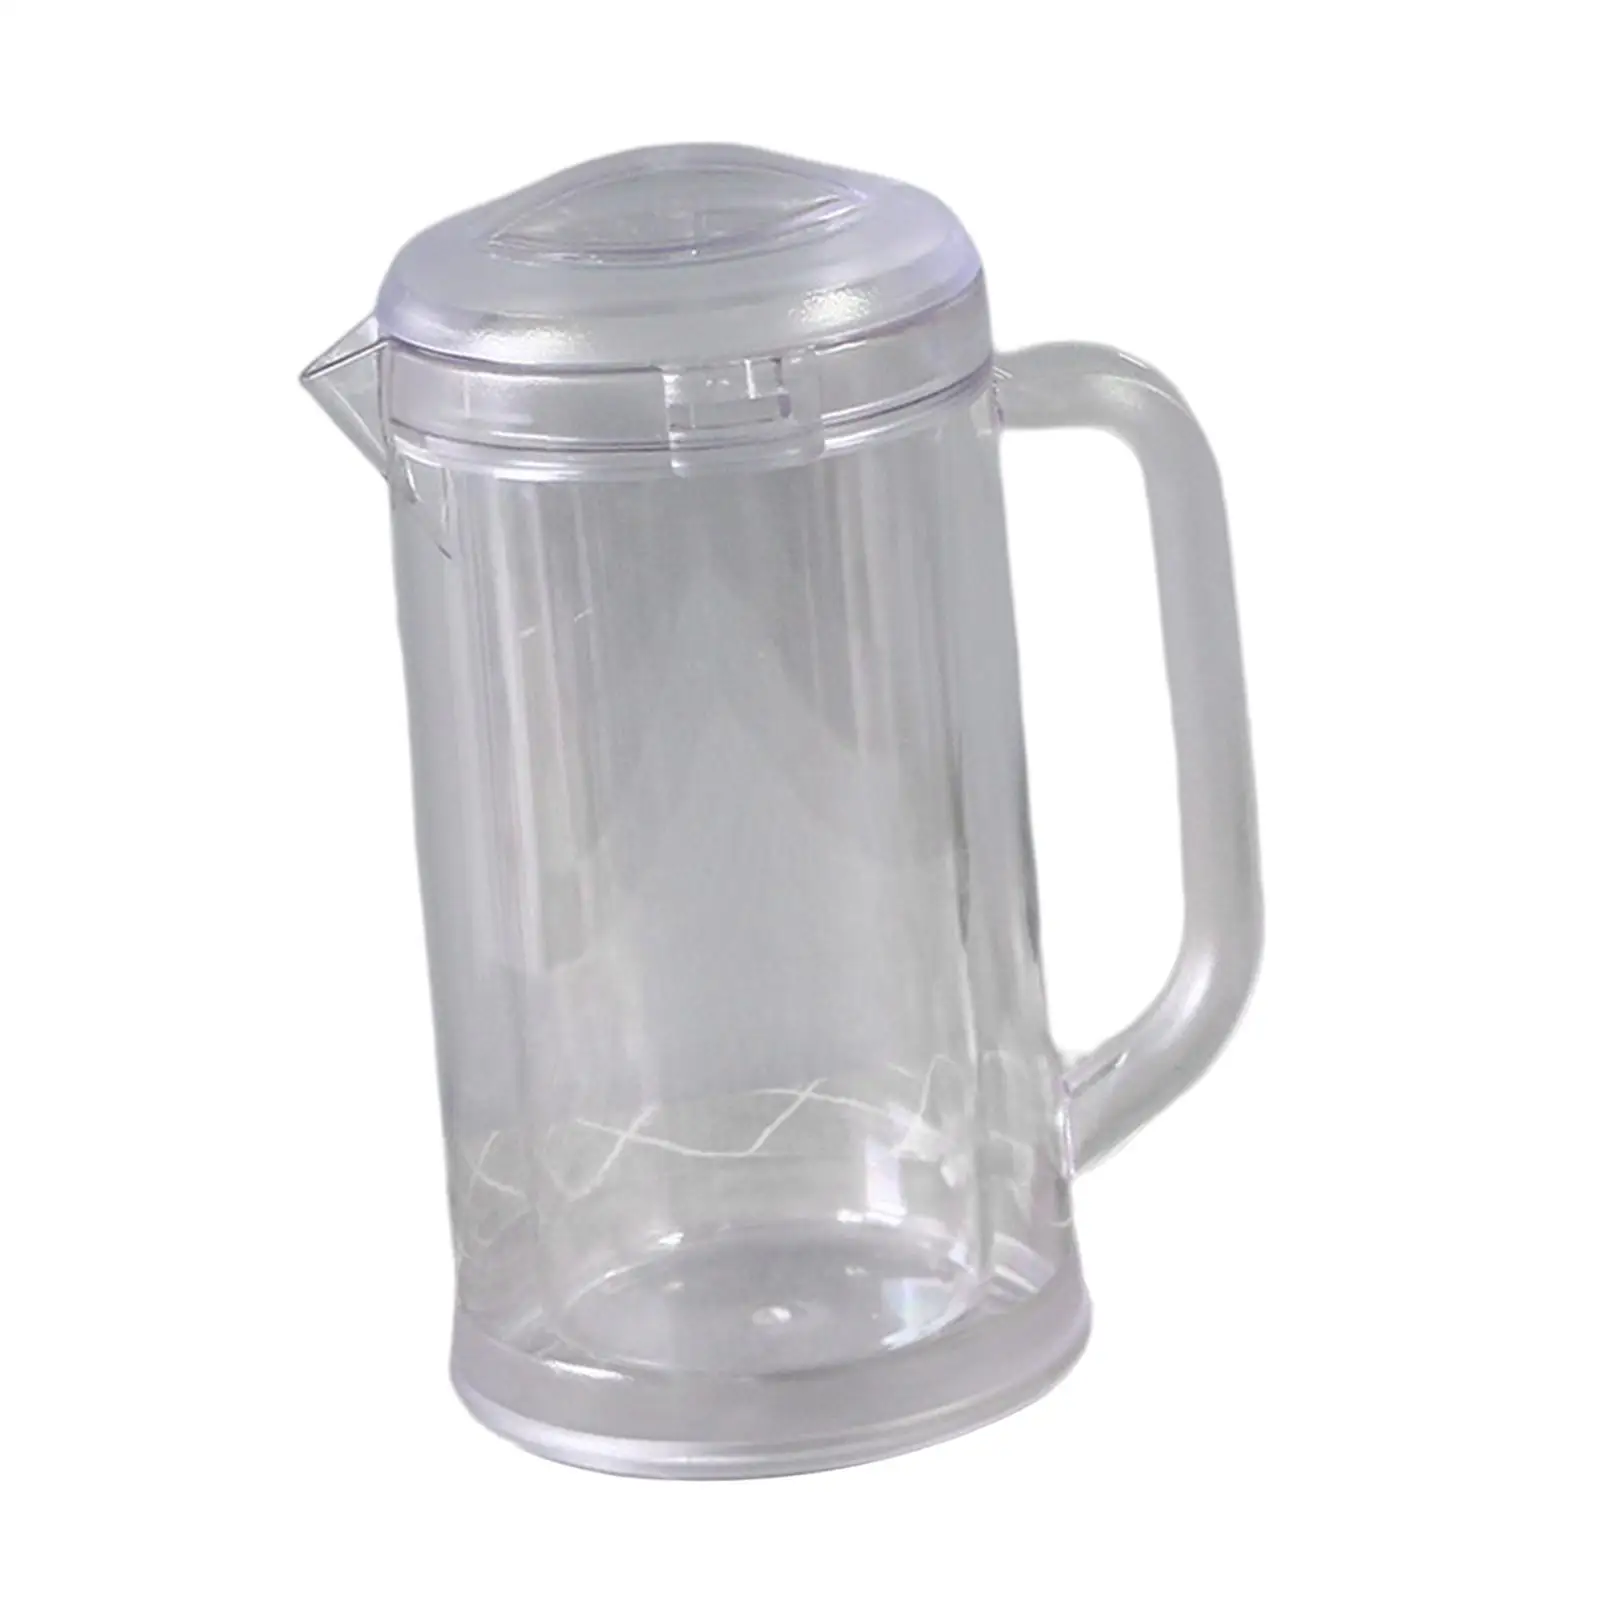 Water Jug Pitcher Easy to Fill Lightweight Leakproof Fridge Jug Teapot Drinkware for Outdoor Drinks Fridge Hot and Cold Iced Tea